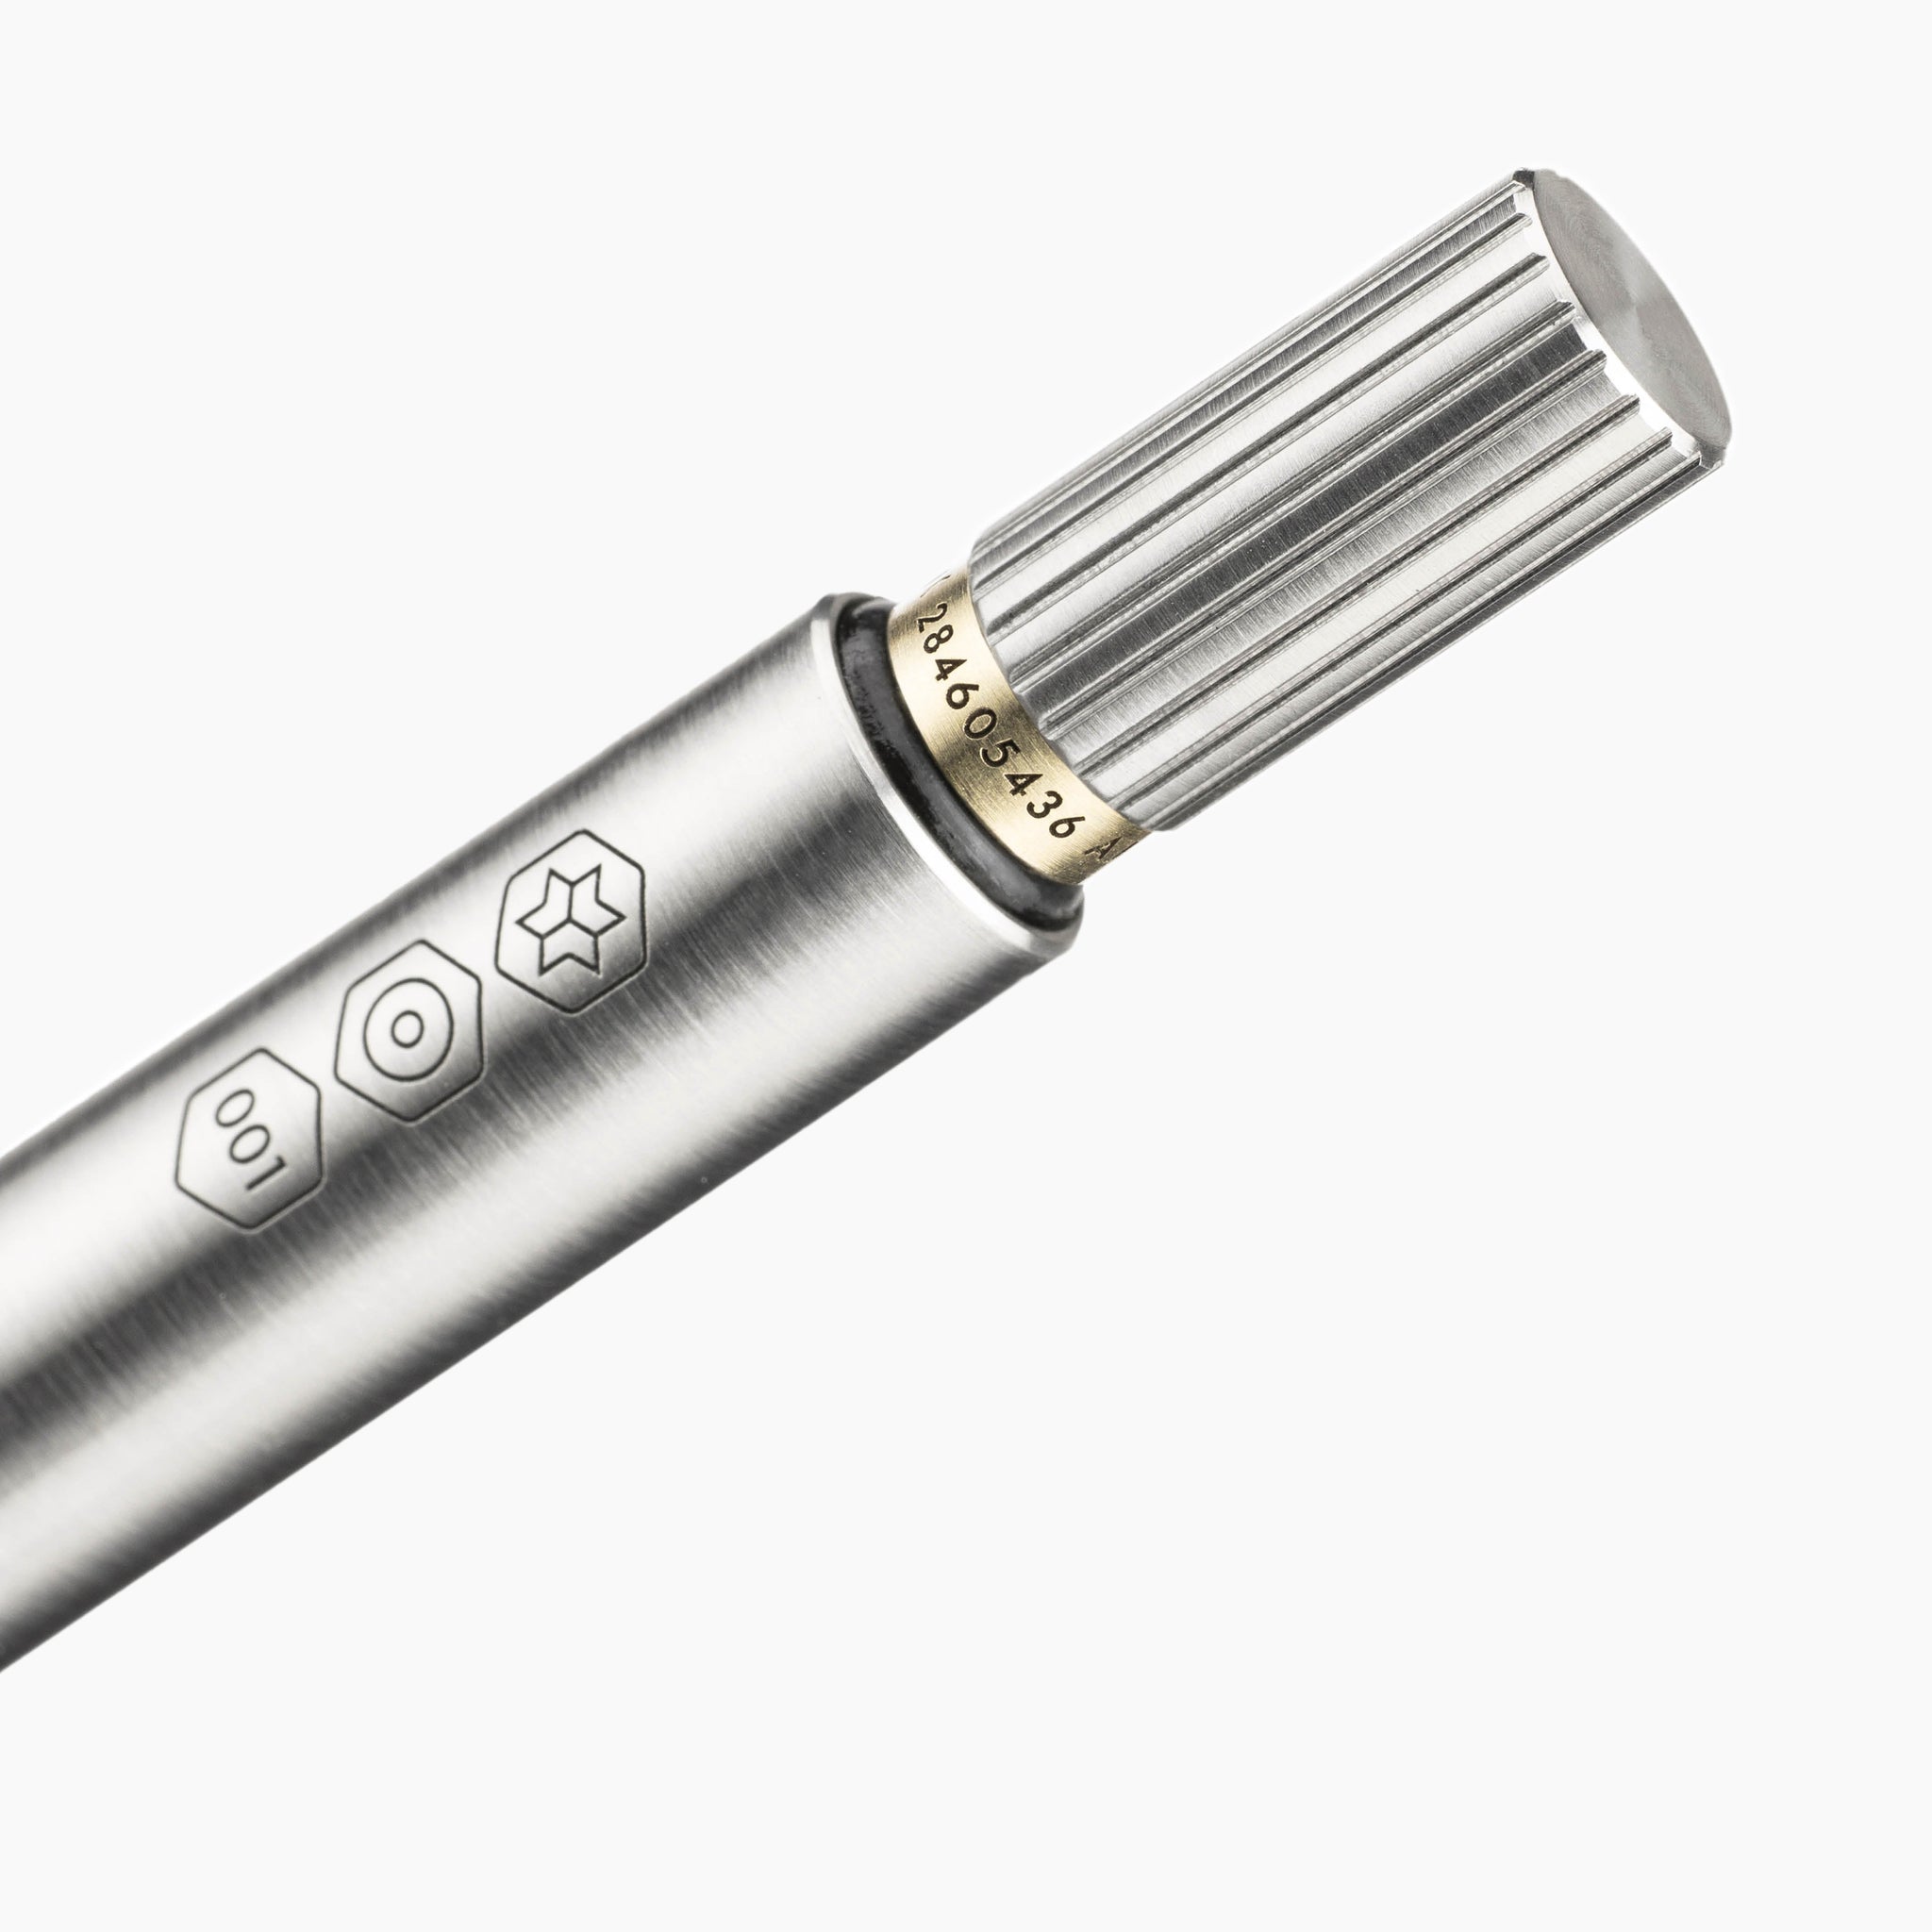 Ajoto - The Pen (Stainless Steel Natural Brushed)-KOHEZI